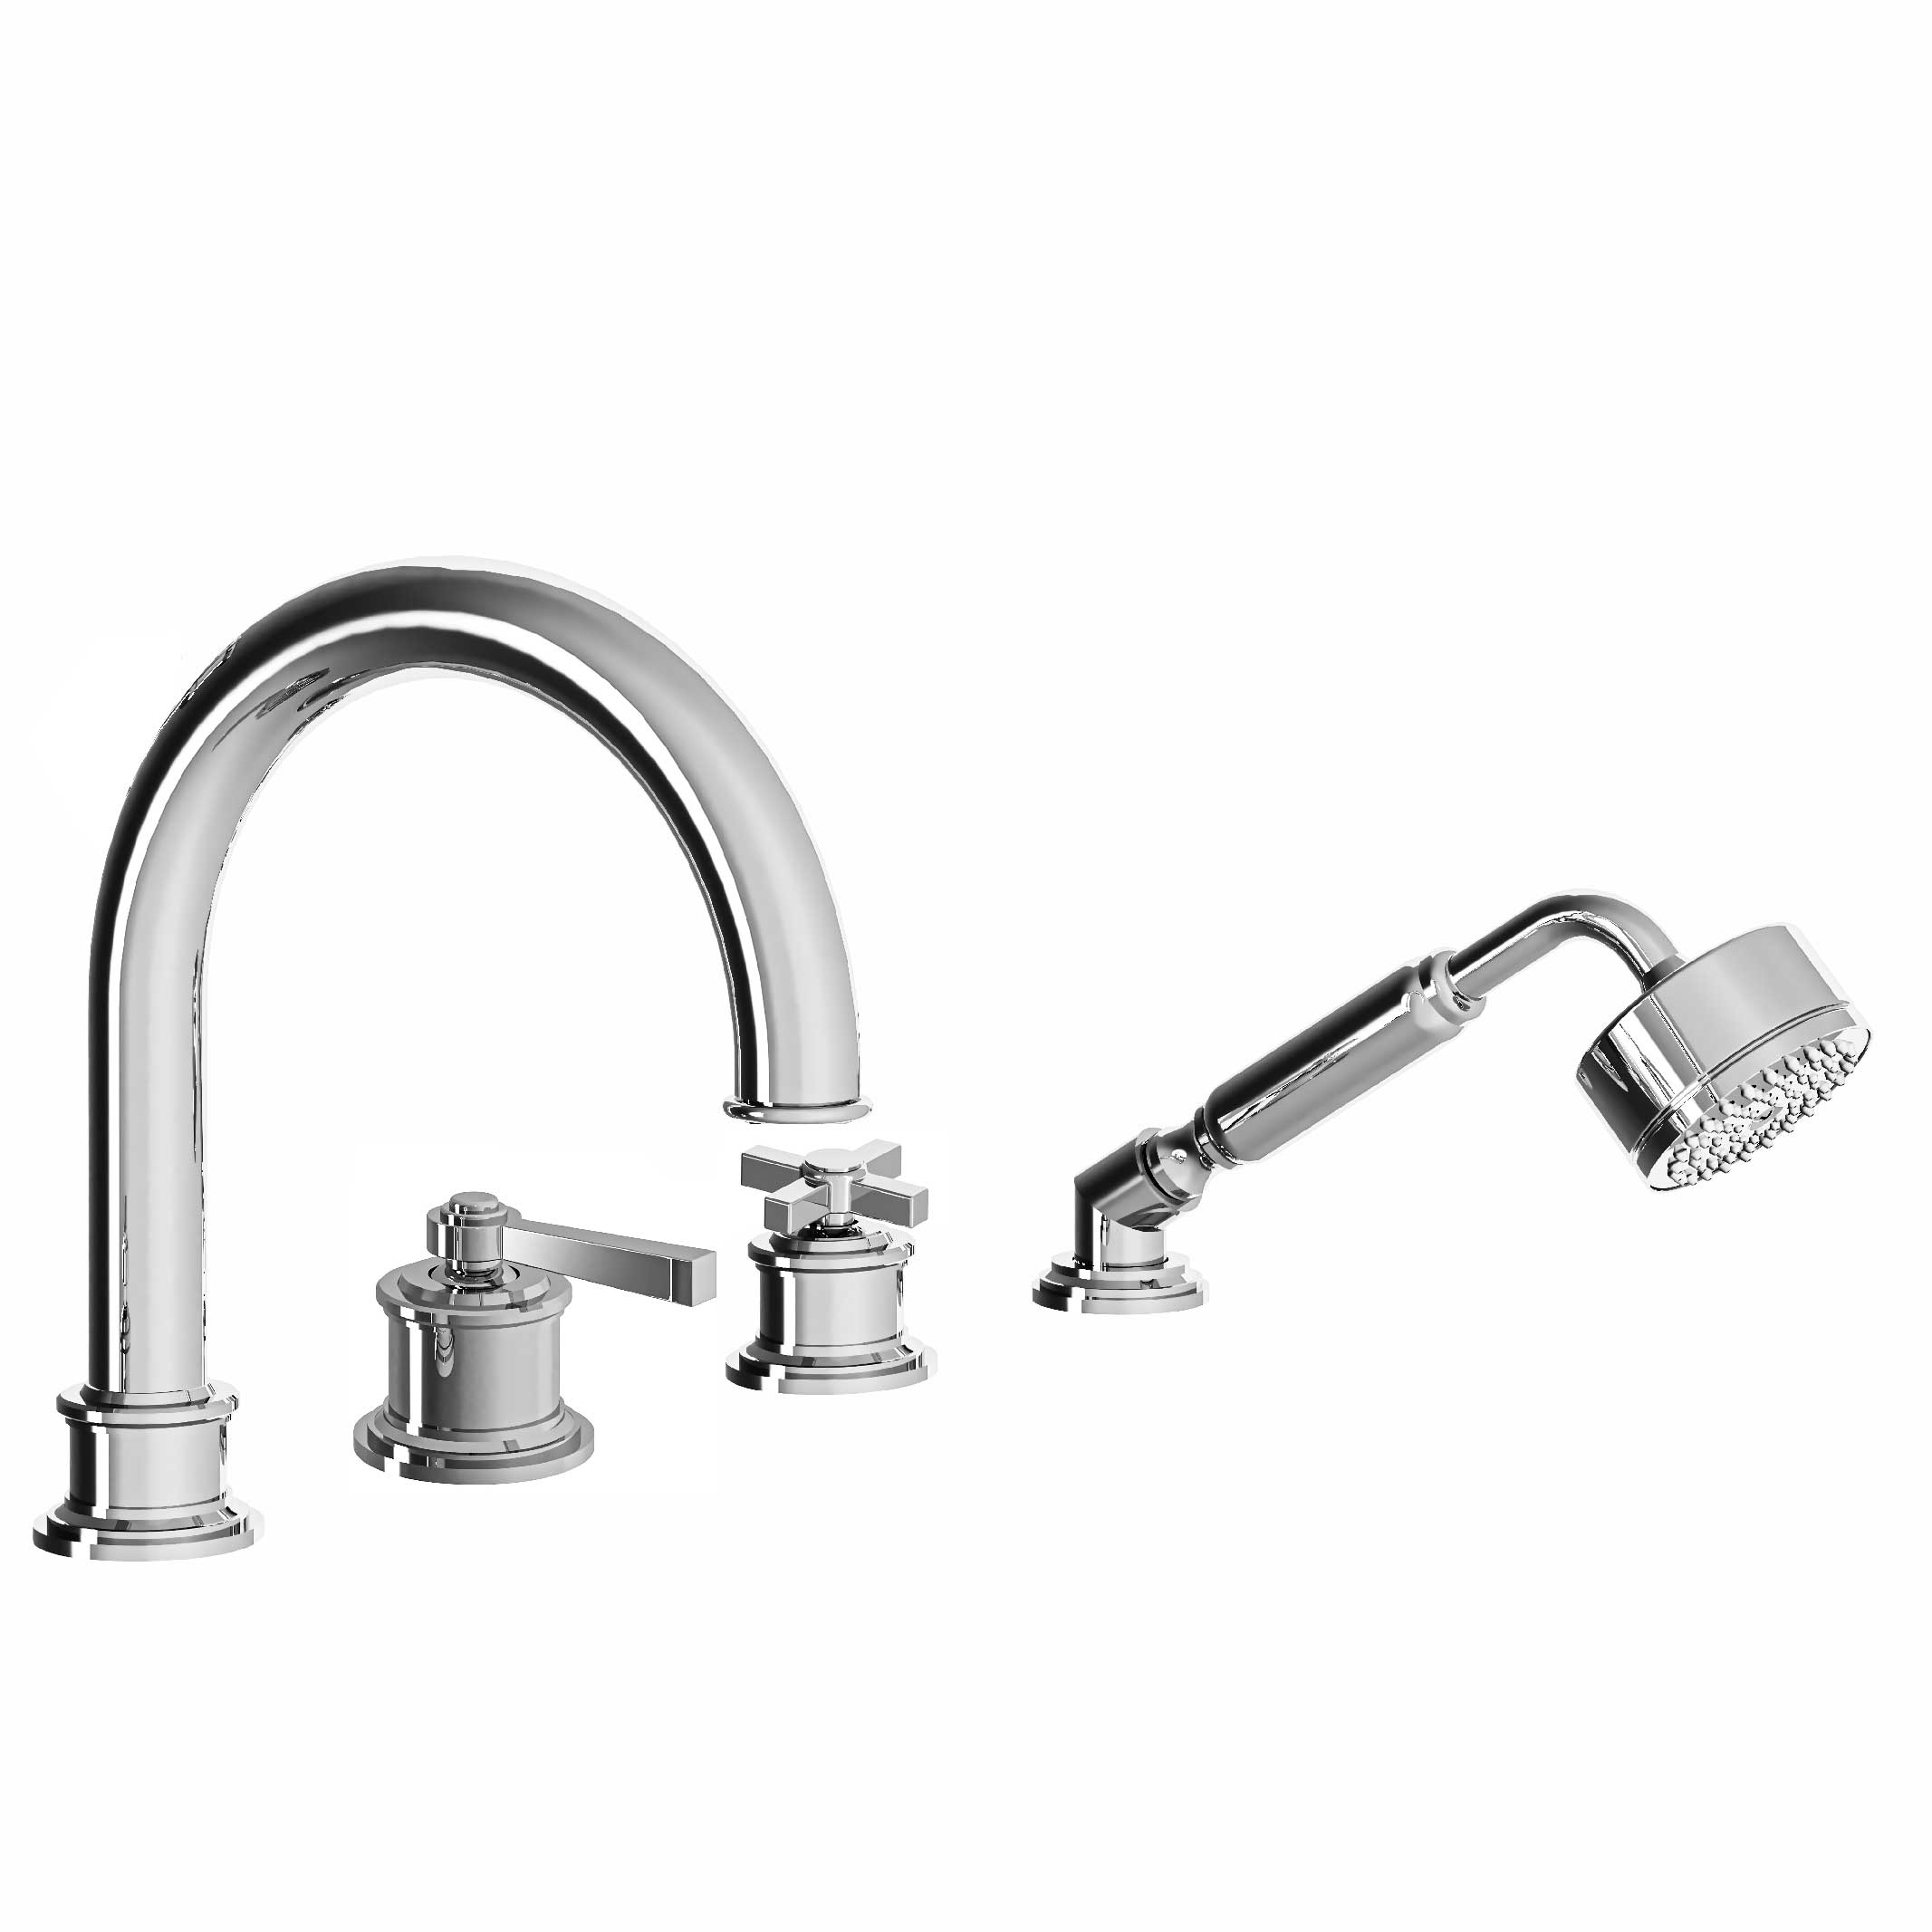 M60-3304M 4-hole single-lever bath and shower mixer